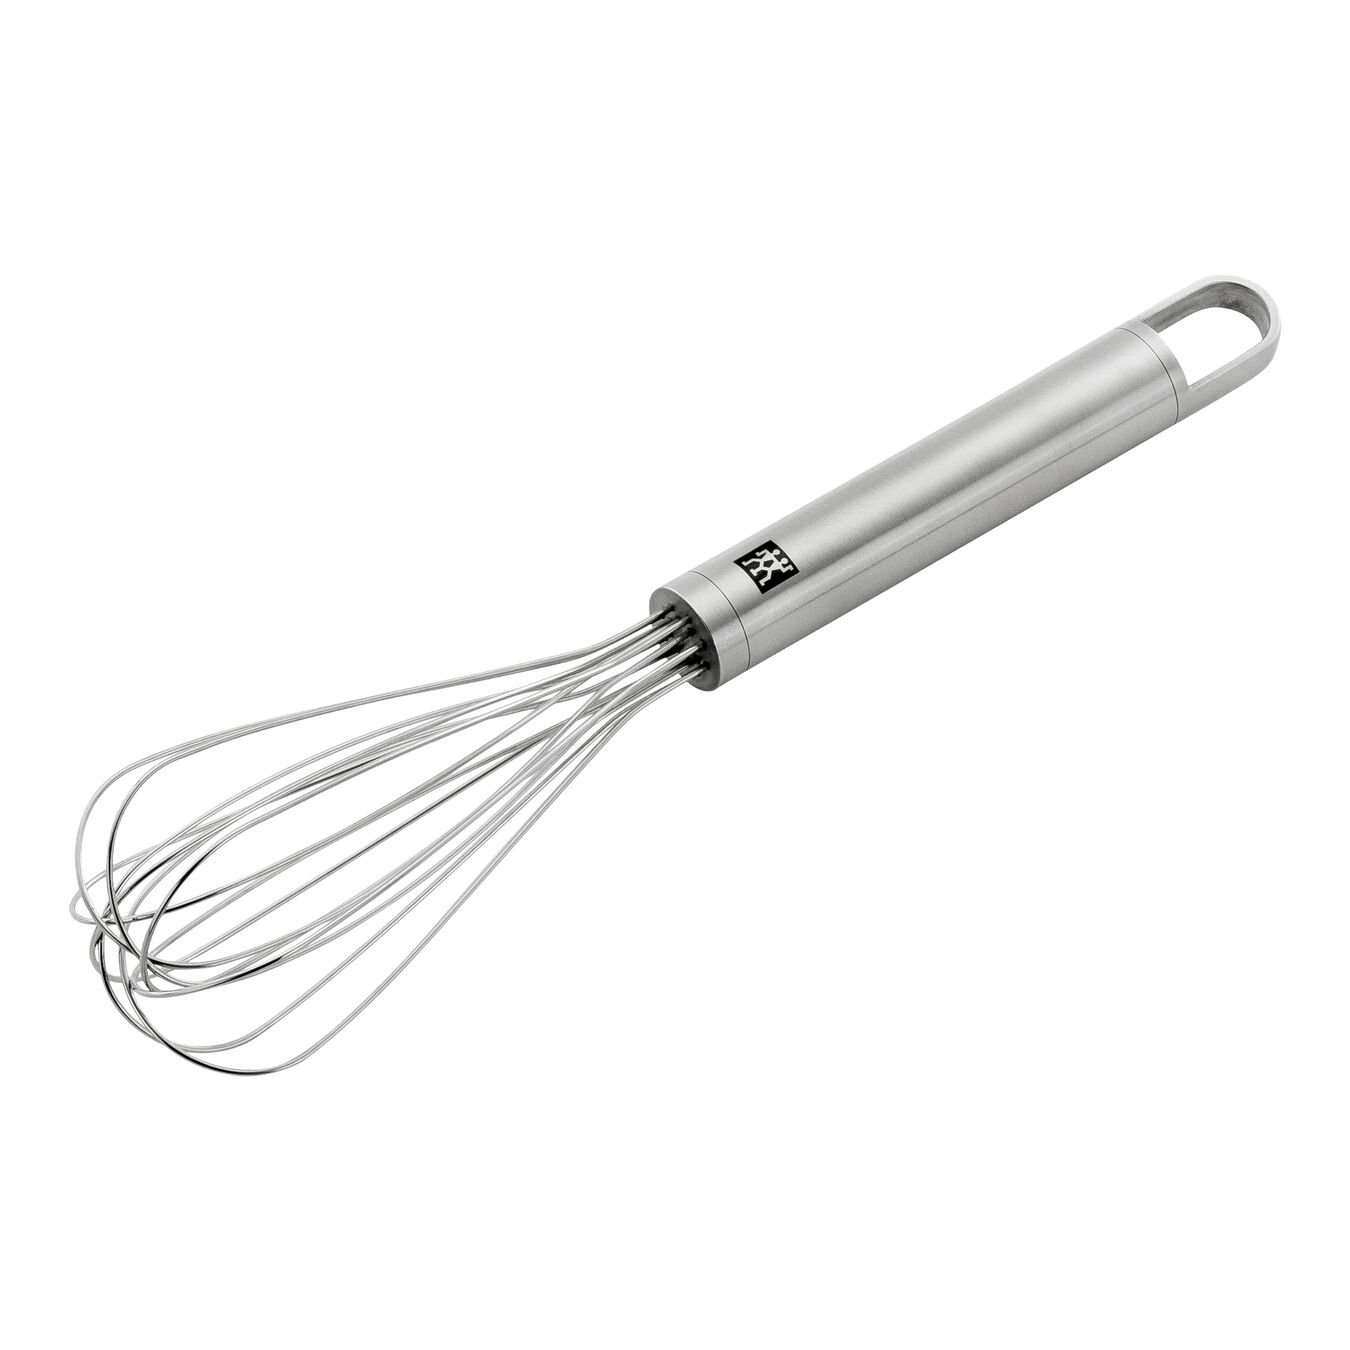 Whisk, 24 cm, 18/10 Stainless Steel,,large 1